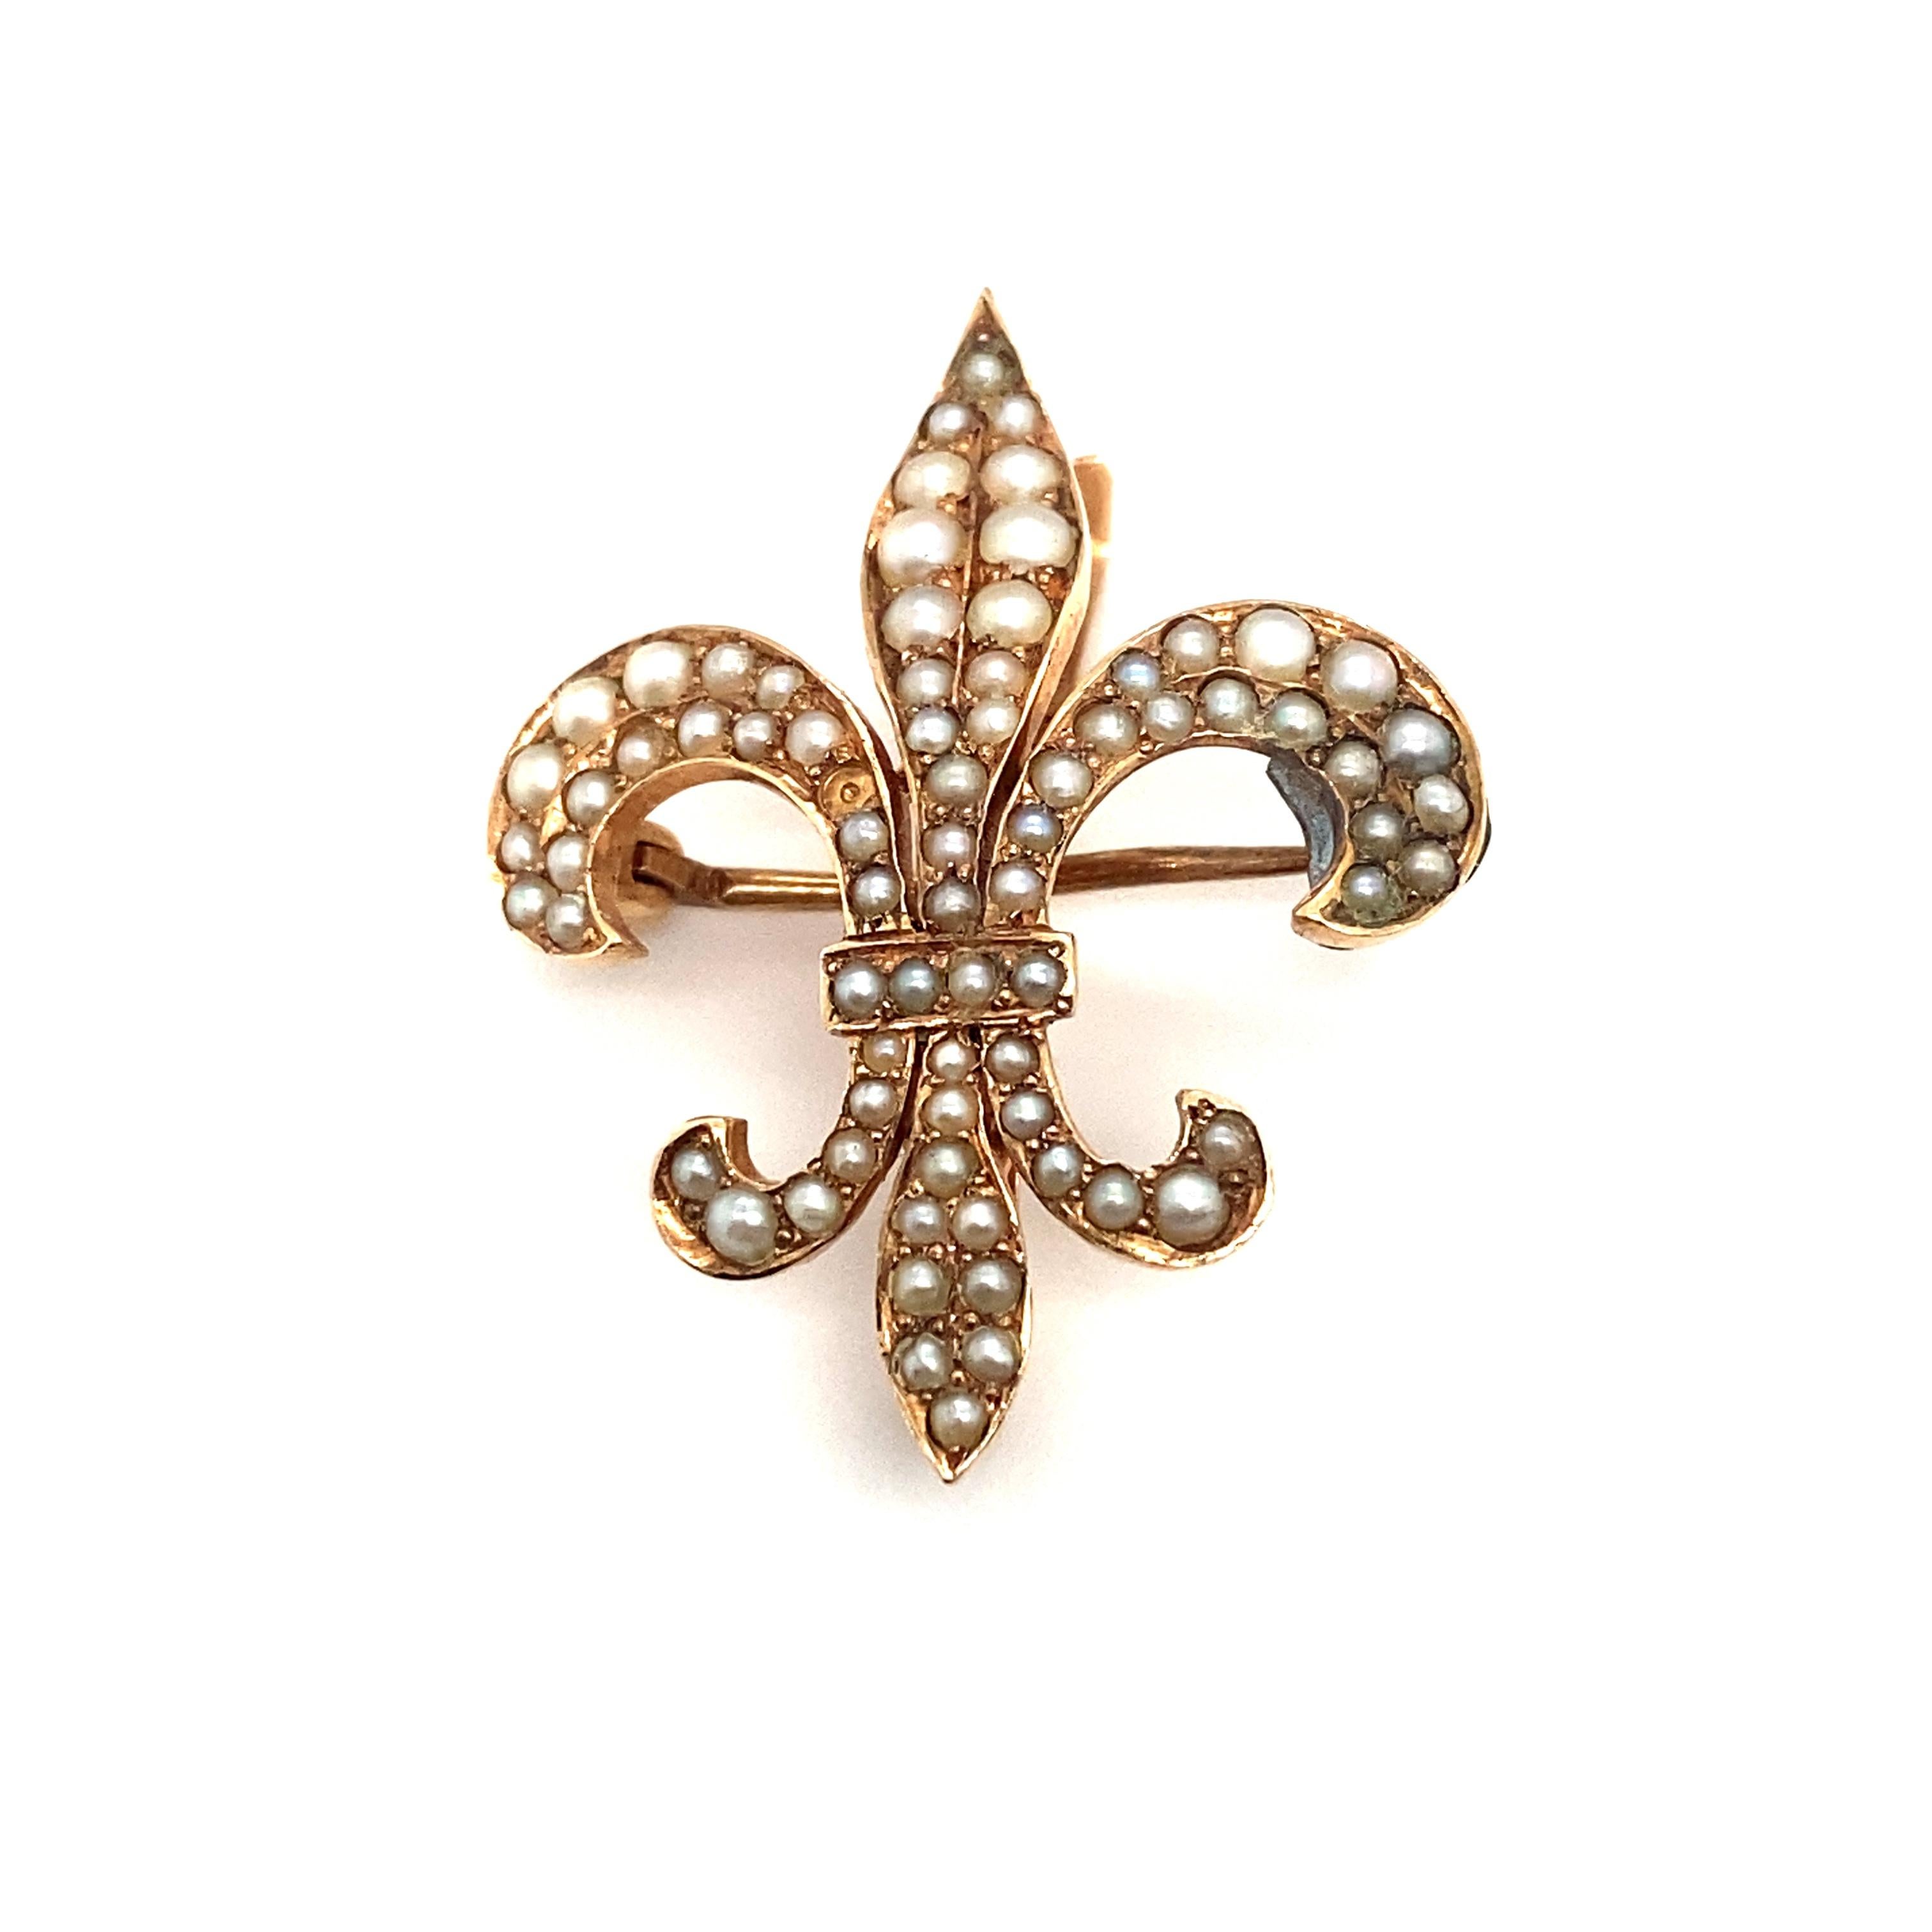 Circa 1890s French Fleur de Lis Seed Pearl Brooch in 14 Karat Yellow Gold In Excellent Condition For Sale In Atlanta, GA